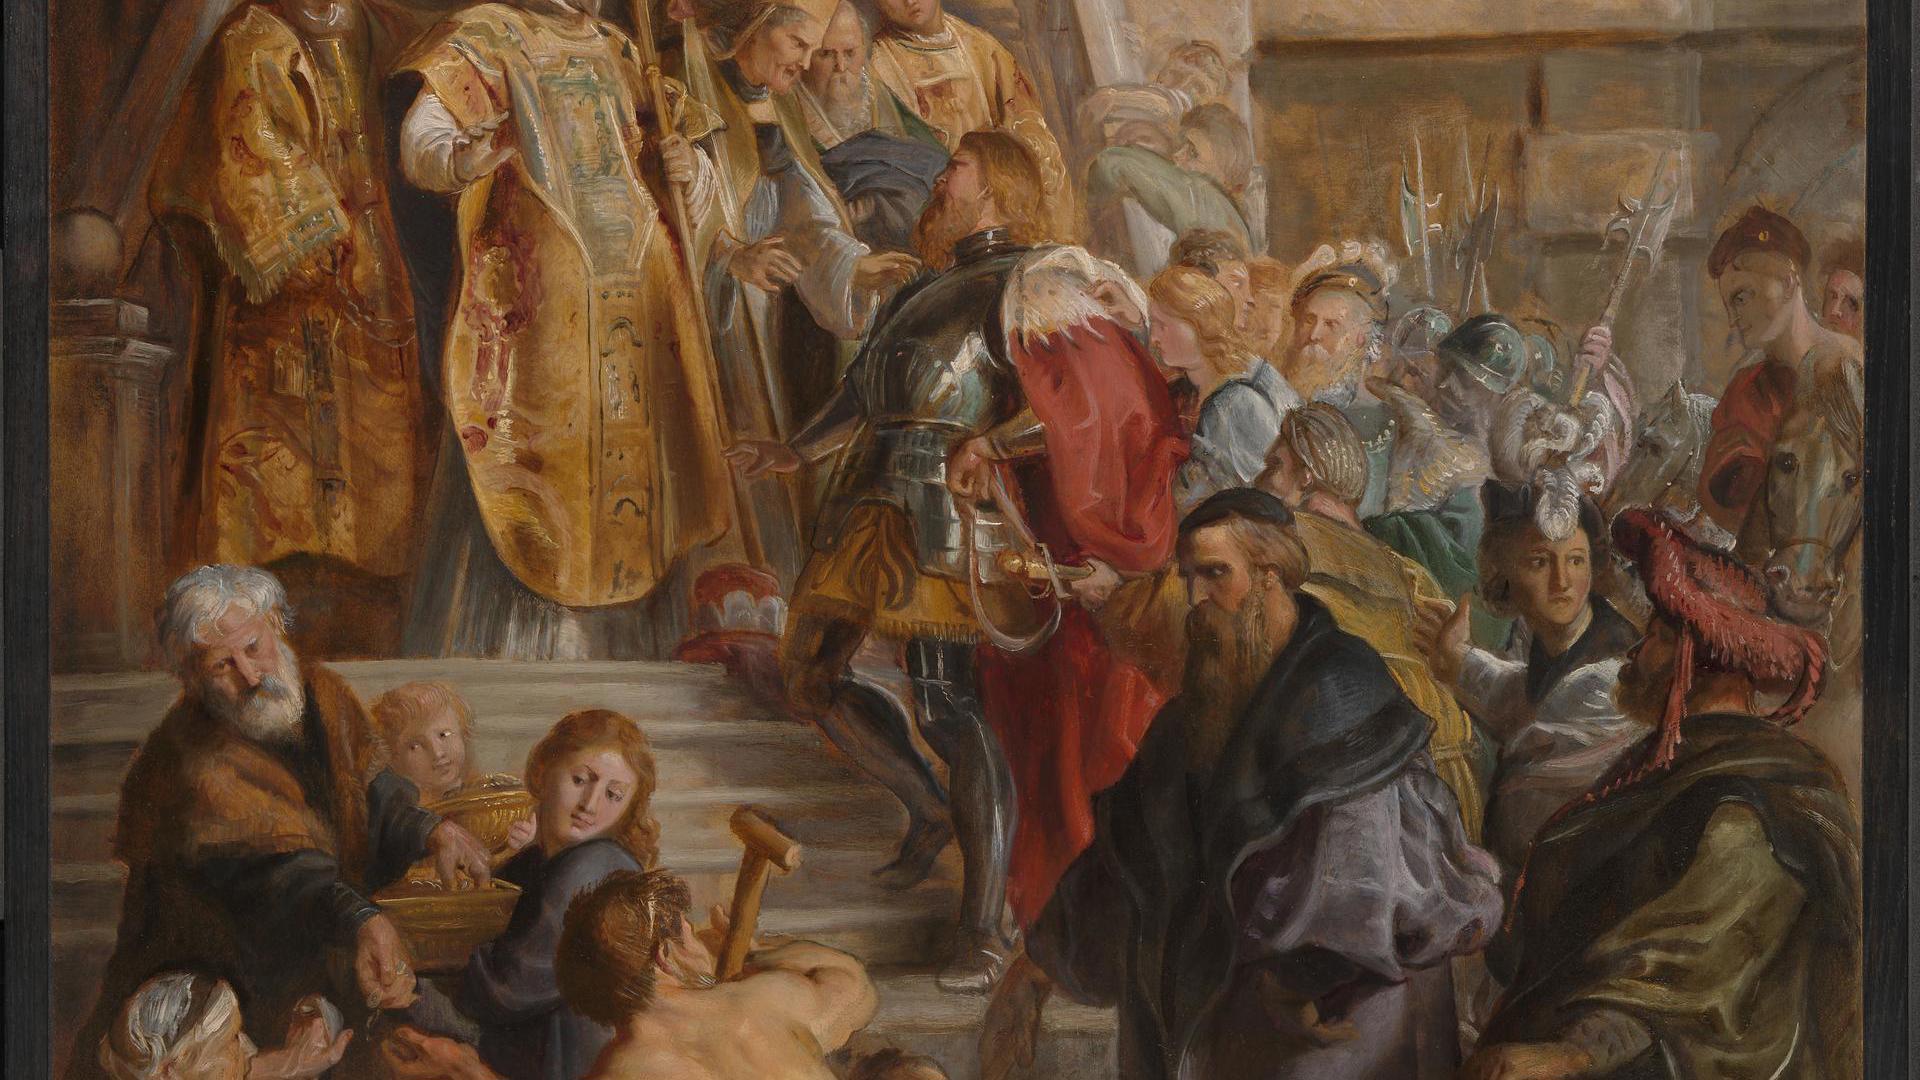 Saint Bavo is received by Saints Amand and Floribert by Peter Paul Rubens